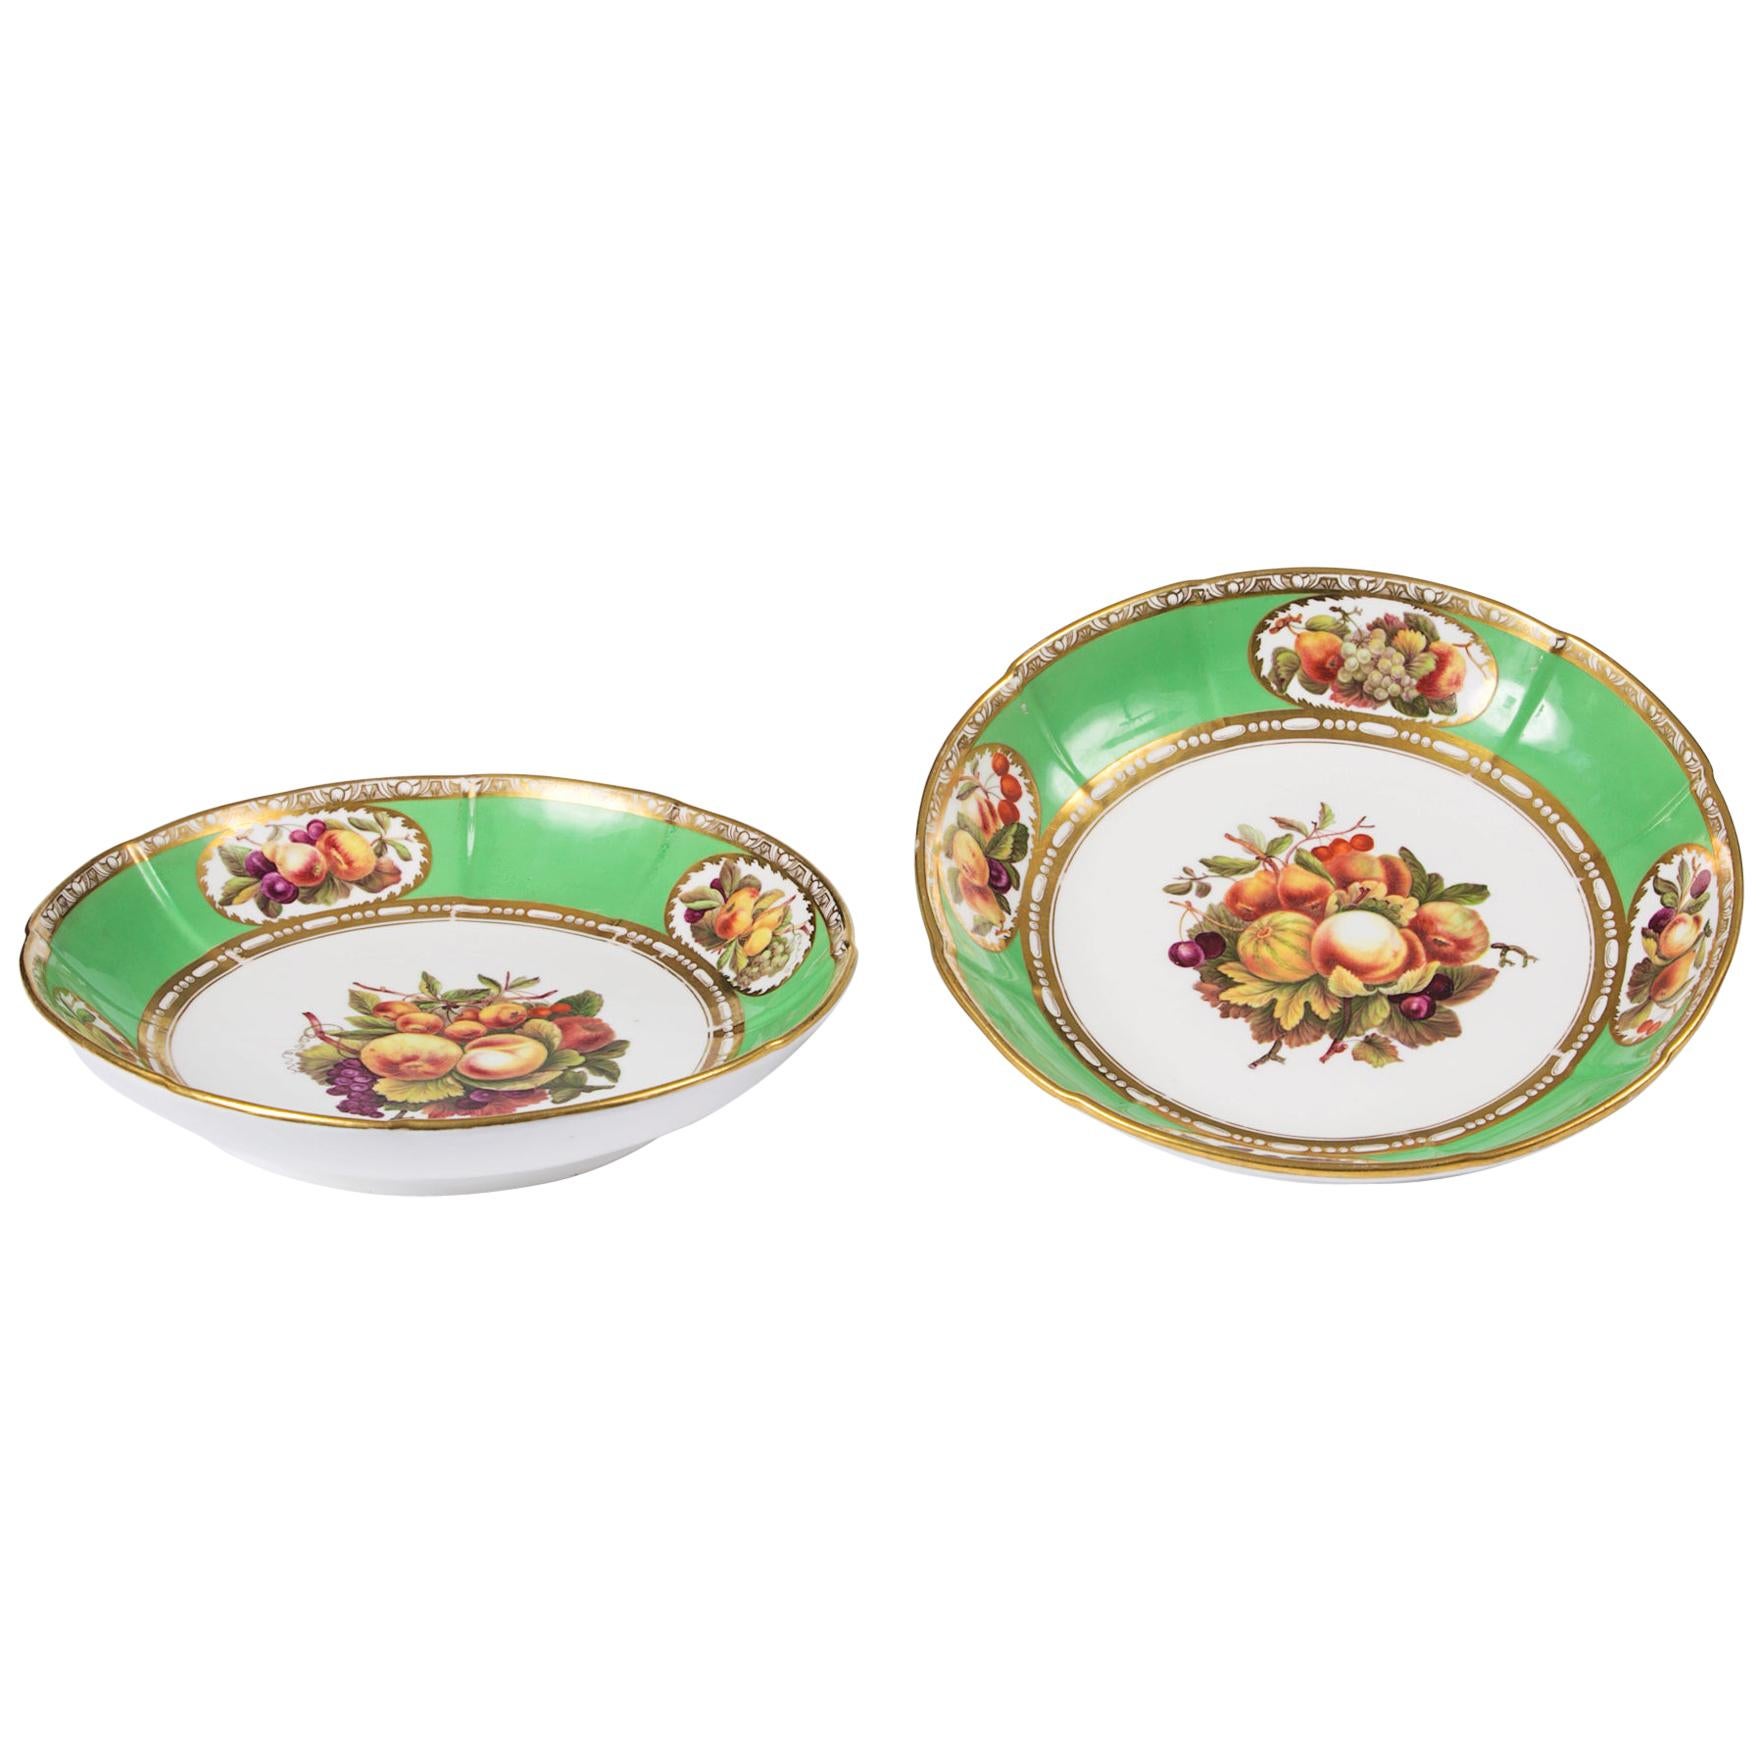 Early 19th Century Regency Spode Pair of Porcelain Dessert Dishes For Sale